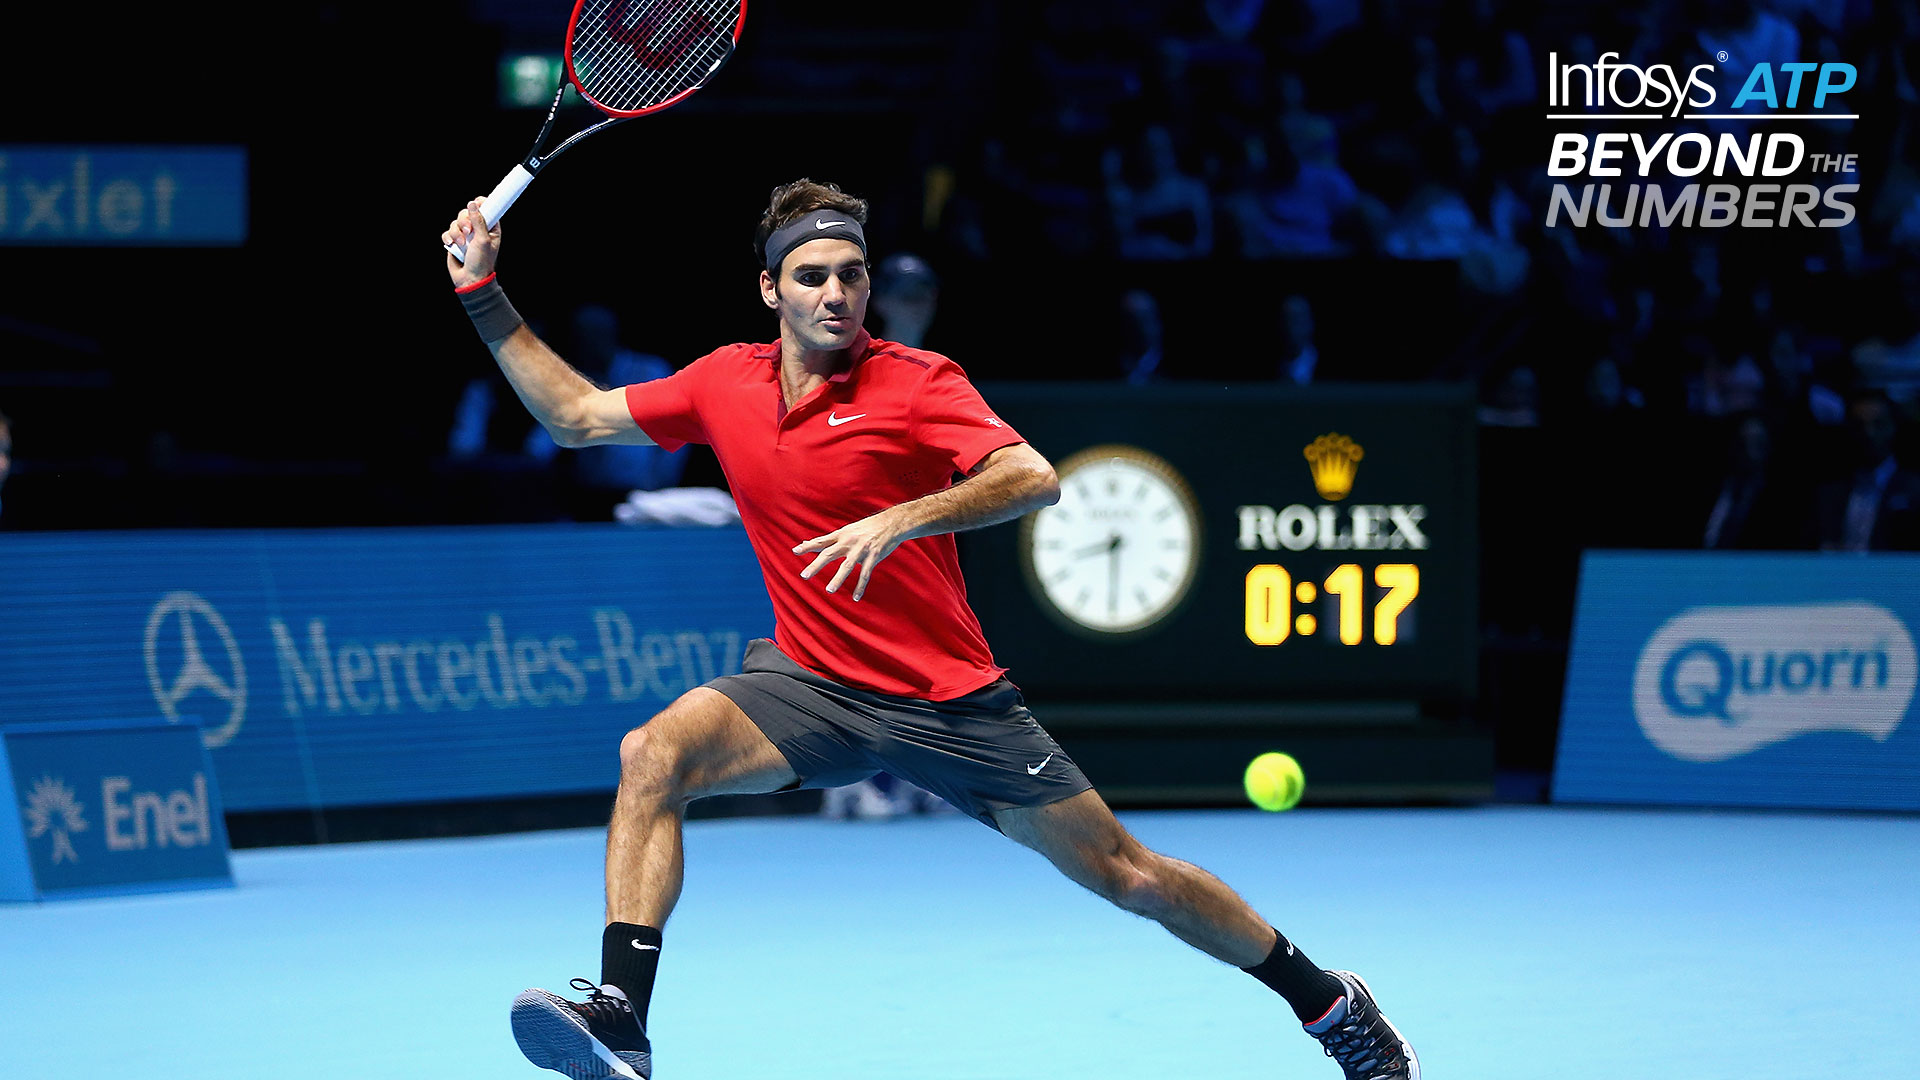 Infosys ATP Beyond The Numbers: Barclays ATP World Tour Finals Leaders